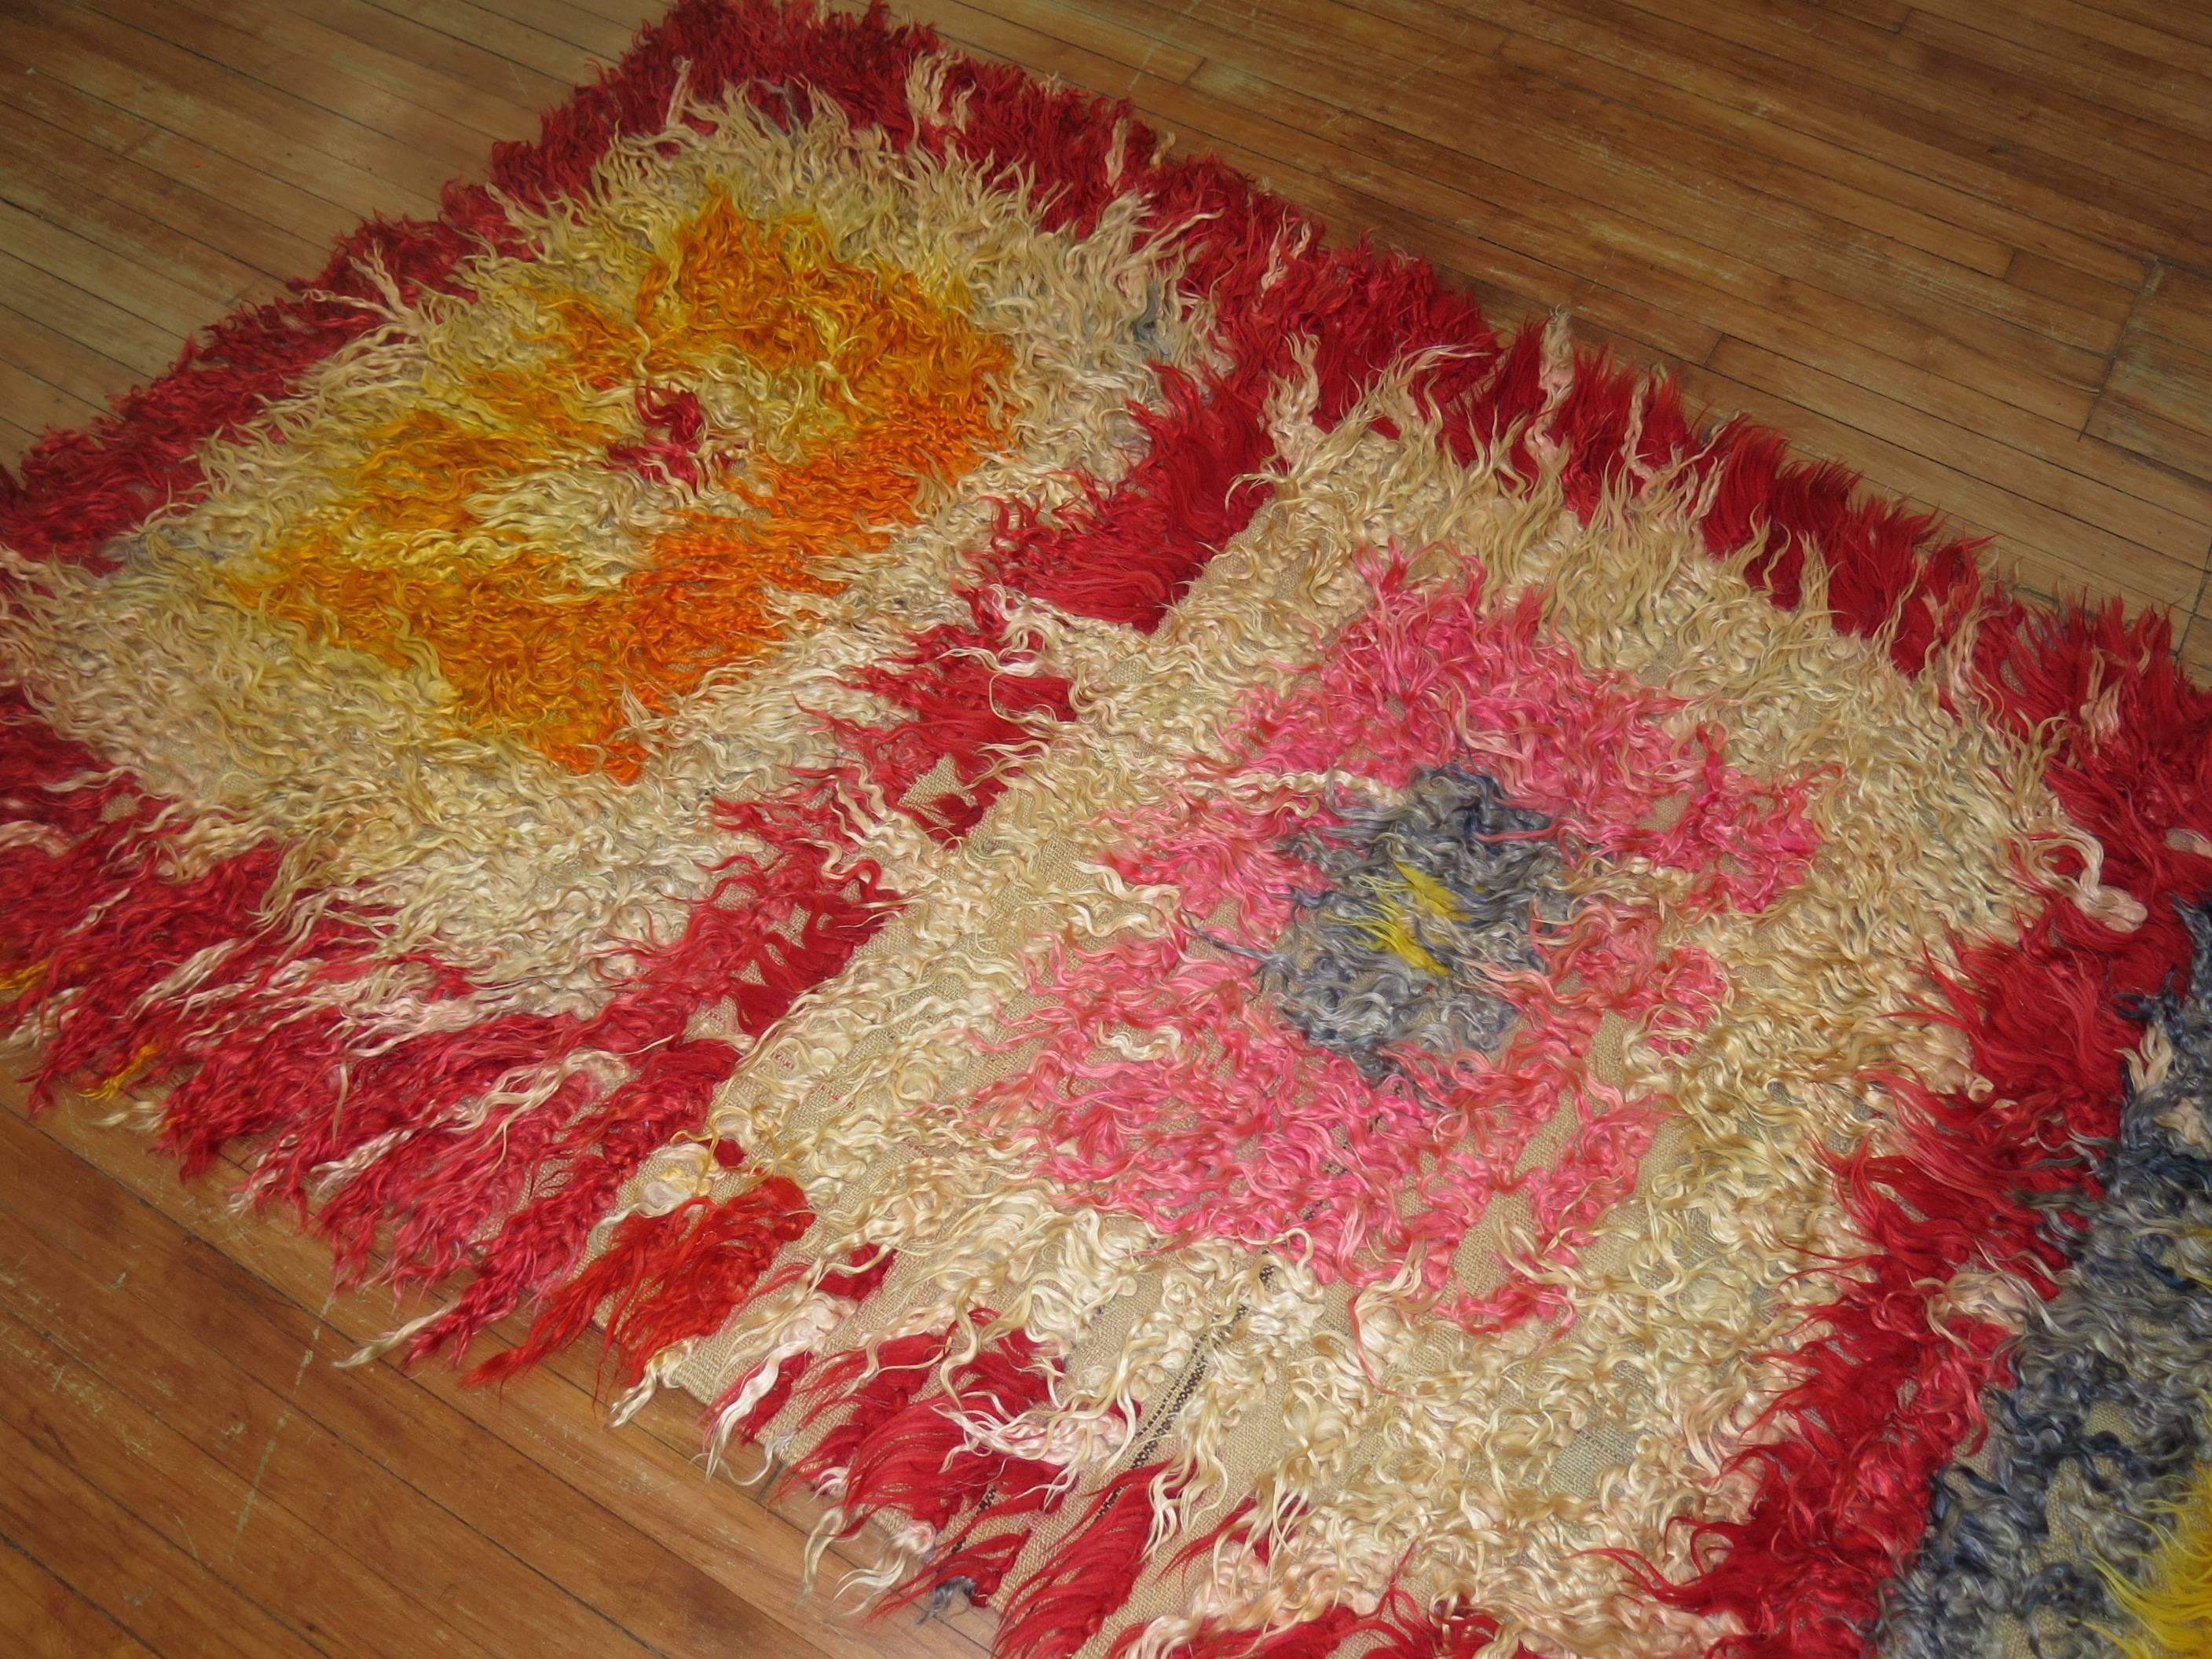 Wild Turkish Tulu Shag wide runner with dominant bright red, pink, yellow, orange accents

Measures: 4' x 9'7